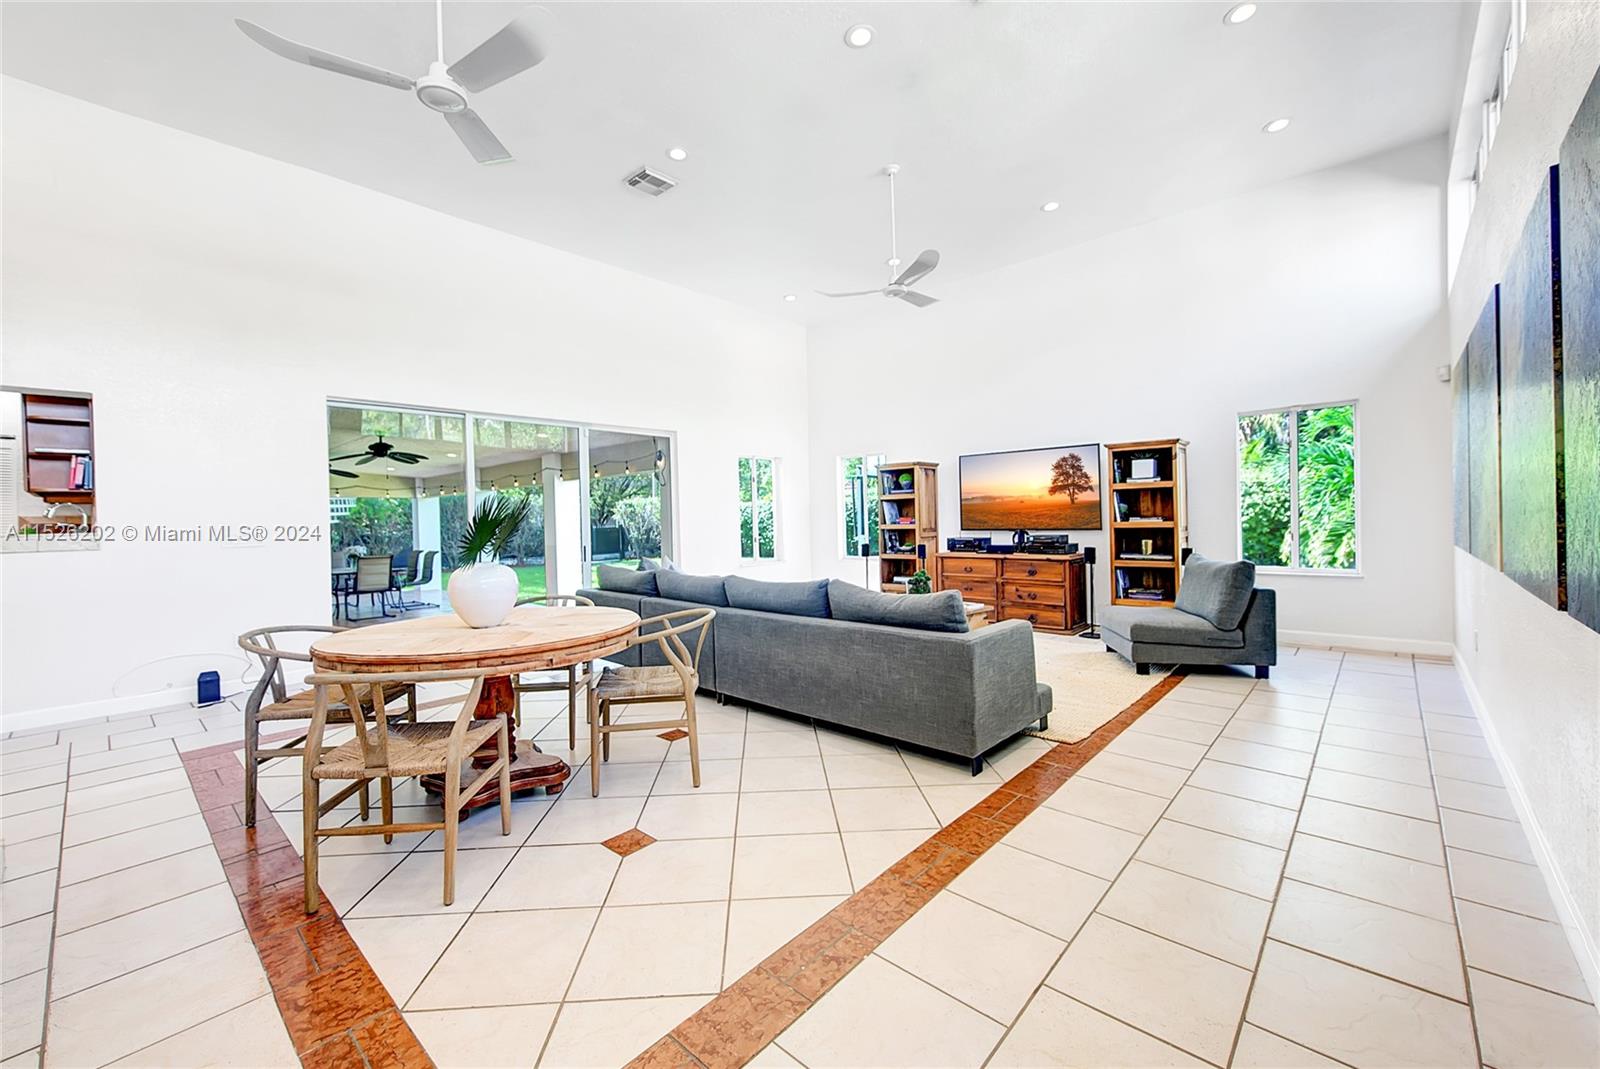 Fabulous gated 5BR/5BA home w/ 5,200 sq ft living space in The Roads/Brickell Hammock. Corner double lot, 2 blocks from ocean, entrance to Brickell, Key Biscayne & Coconut Grove. Outdoor views & white tile floor, formal living & dining rms, office, huge family rm w/14ft ceiling/sky views. BR's w/walk-in-closets, hardwood floors, marble baths. Upstairs master suite w/balcony, separate sitting room, & luxury bath w/jacuzzi. Kitchen w/granite counters, wood cabinets, steel appliances. Covered terrace, basketball court, large backyard lawn w/ separate drive-through gate. Security system w/ cameras, 2x 5-ton AC's, 2x remote controlled electric gates, secure 5x car driveway with covered carport, electric car charger & irrigation system.